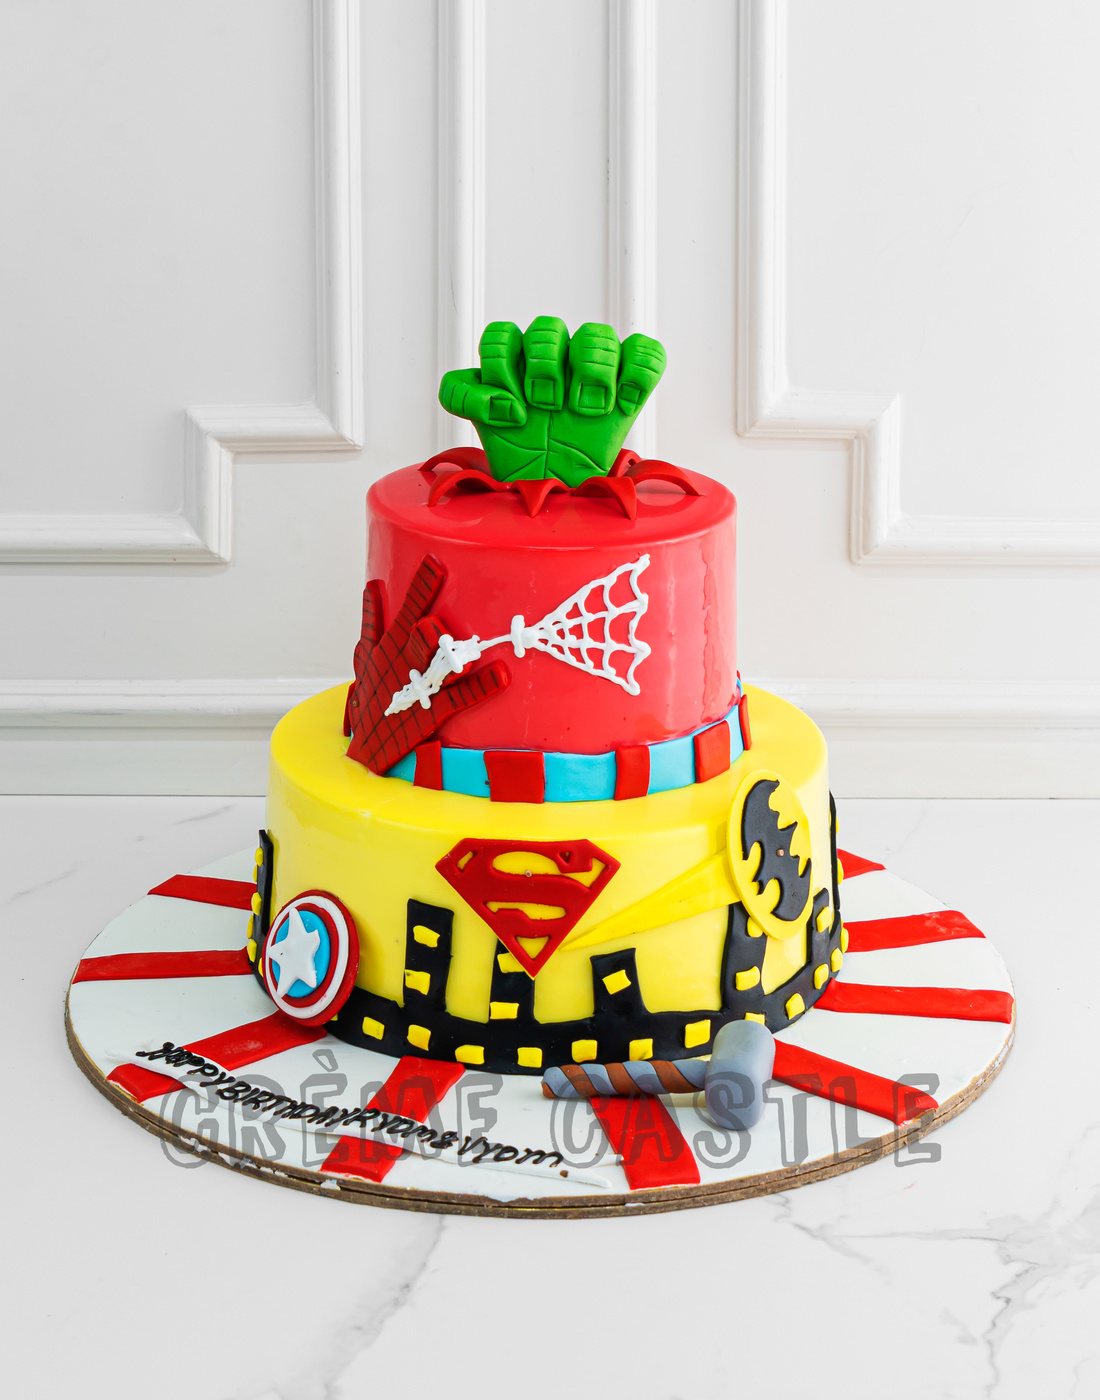 Best Avengers Theme Cake In Indore | Order Online